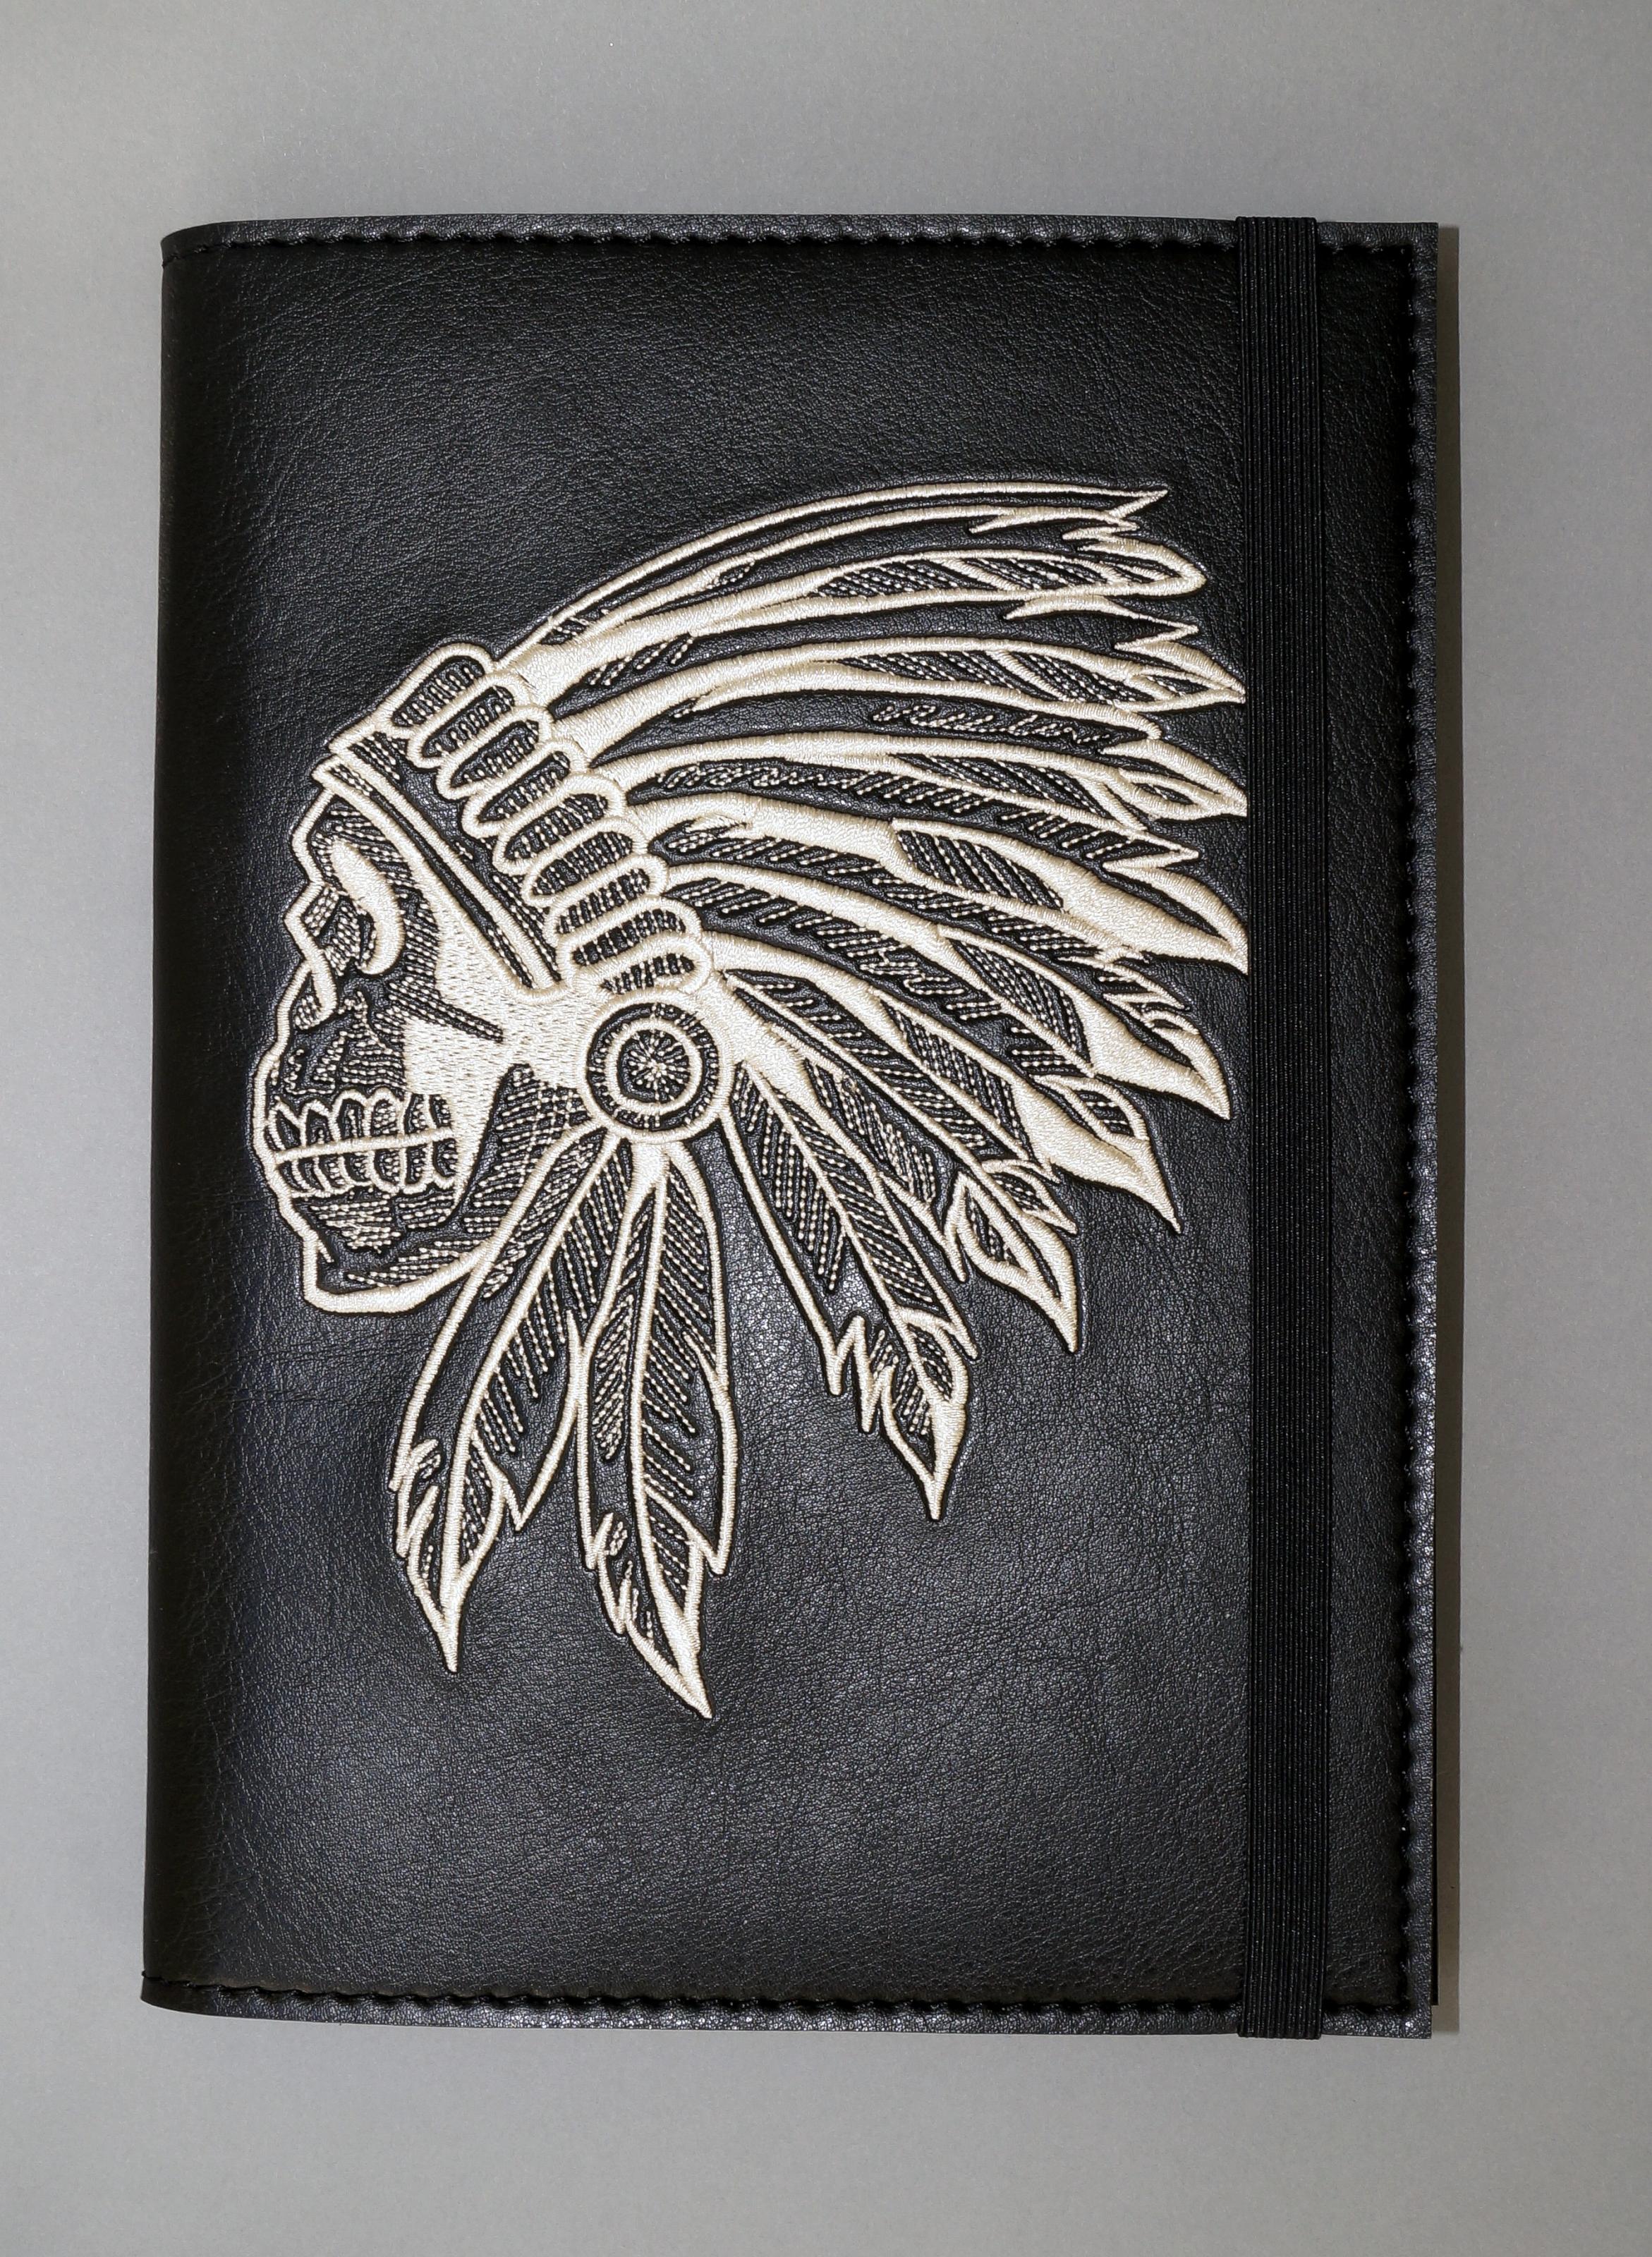 Embroidered leather cover with Indian skull design